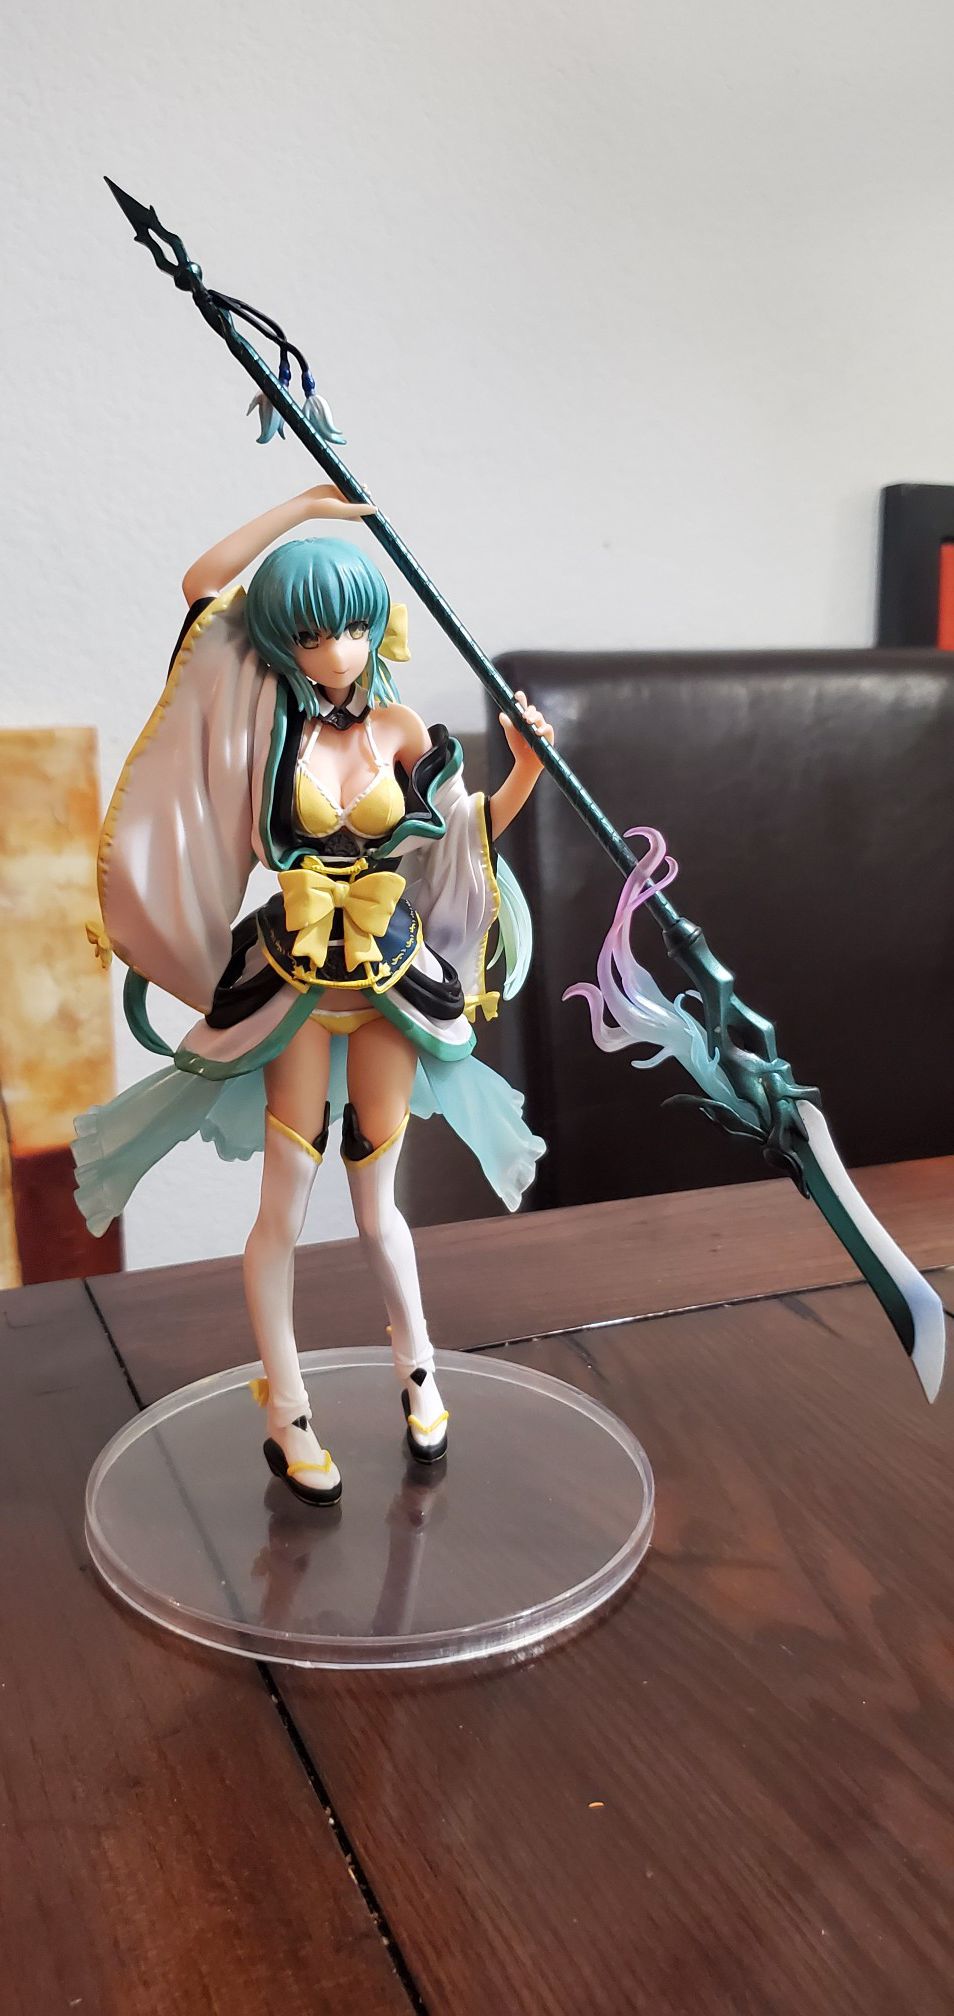 (Cheap) Anime Fate/Grand Order Lancer Kiyohime 1/7 PVC Action Figure Toy New - no box - missing horn accessories - pick up only